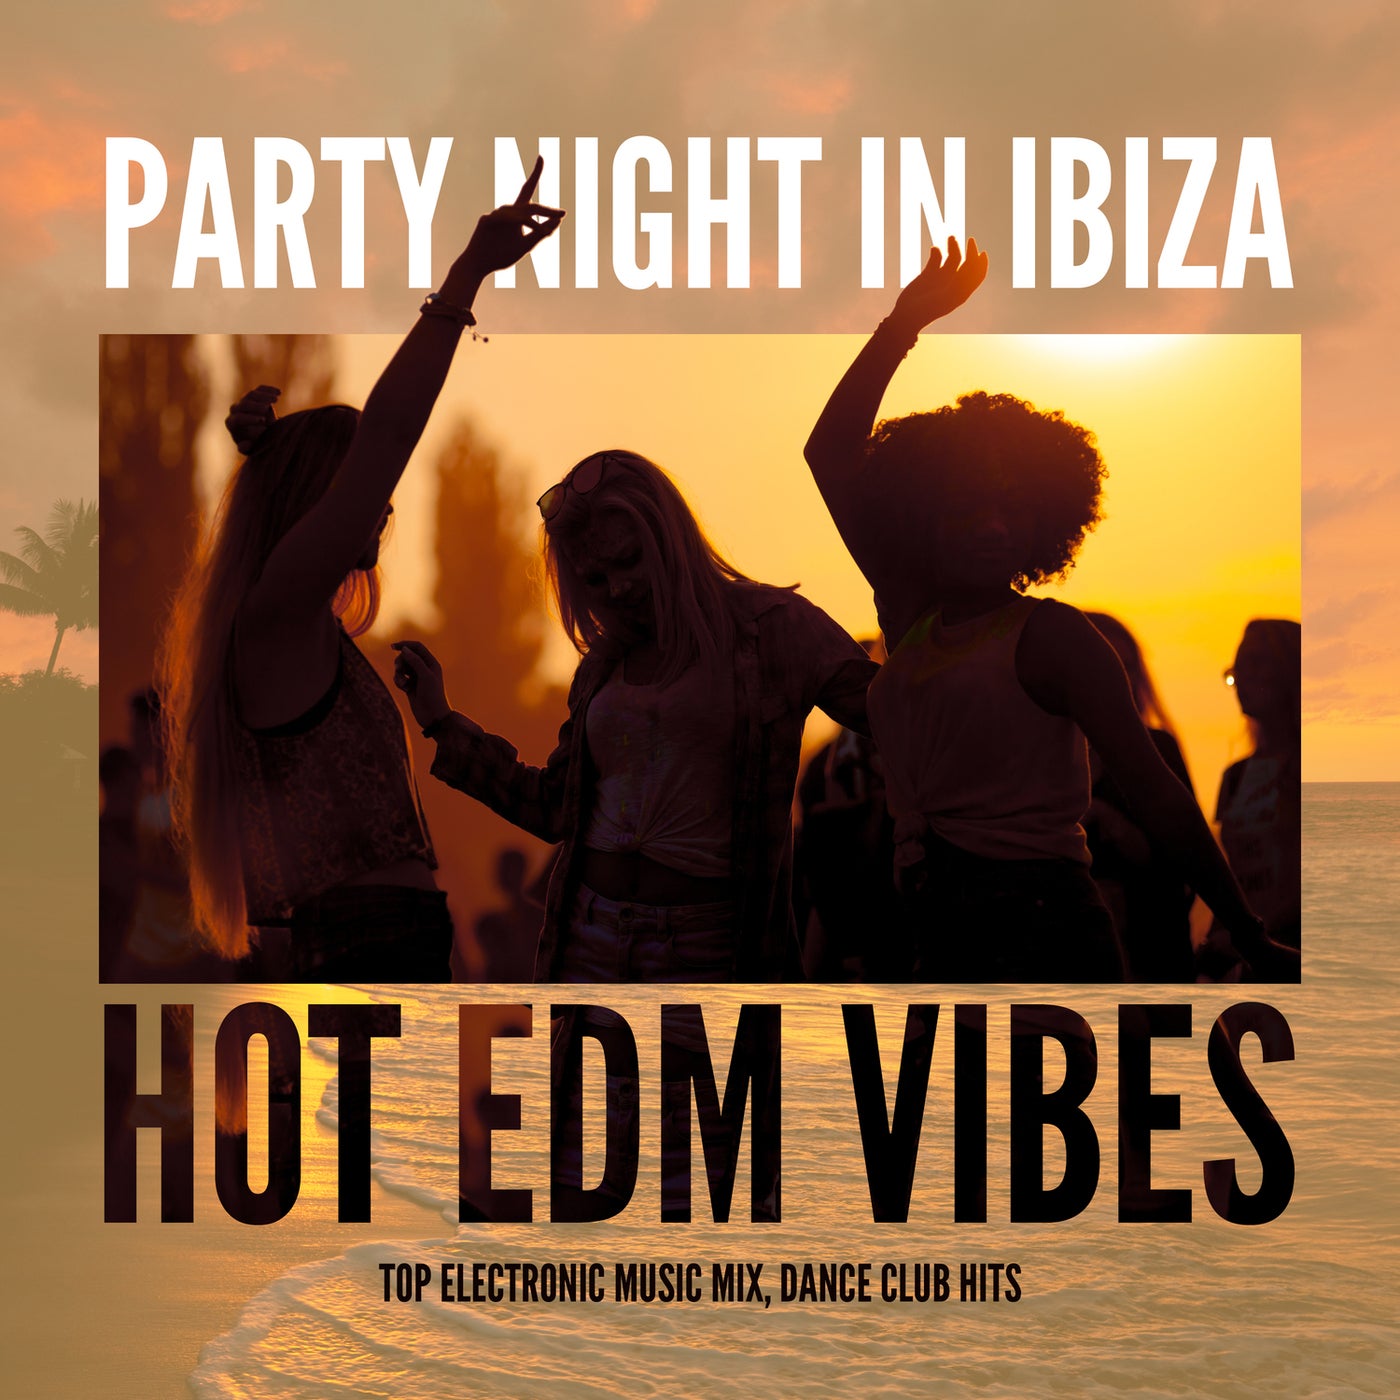 Party Night in Ibiza – Hot EDM Vibes, Top Electronic Music Mix, Dance Club Hits